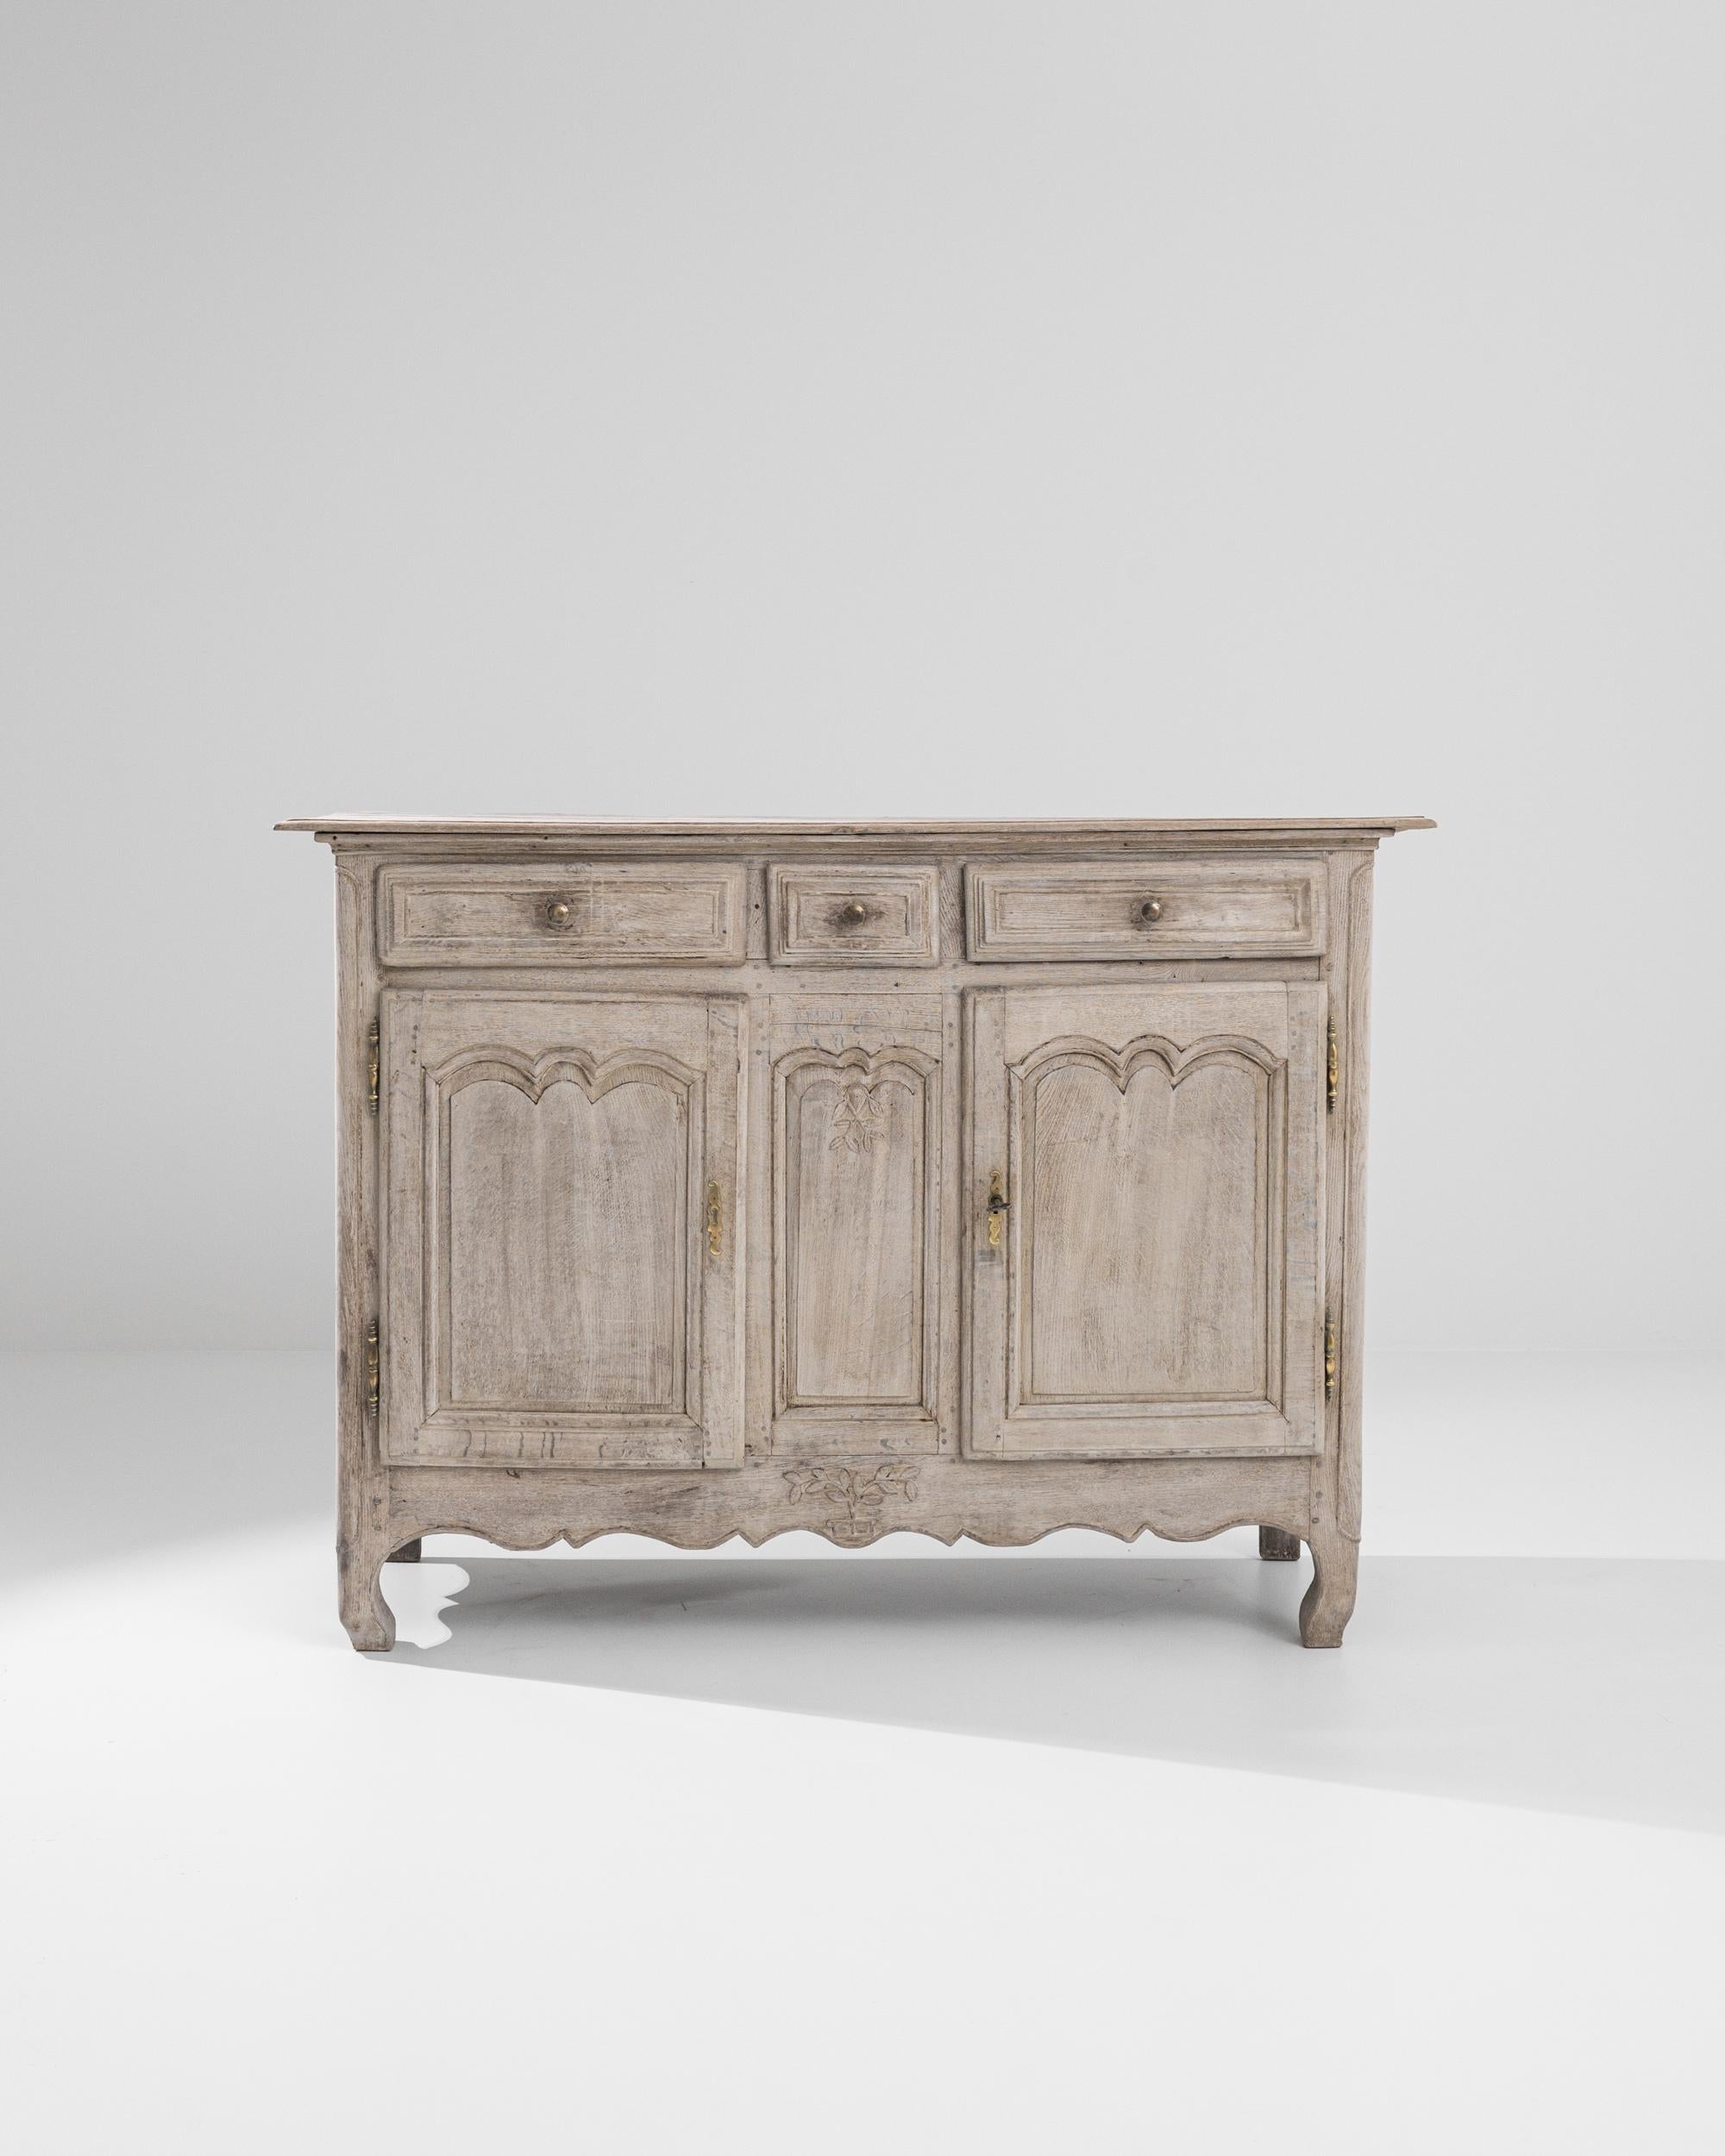 The quintessential Country French buffet cabinet, made circa 1800. The simple geometric shape recalls a countryside local and the time tested approach of regional French cabinet makers. Combining earthy colors and elevated craftsmanship, this buffet